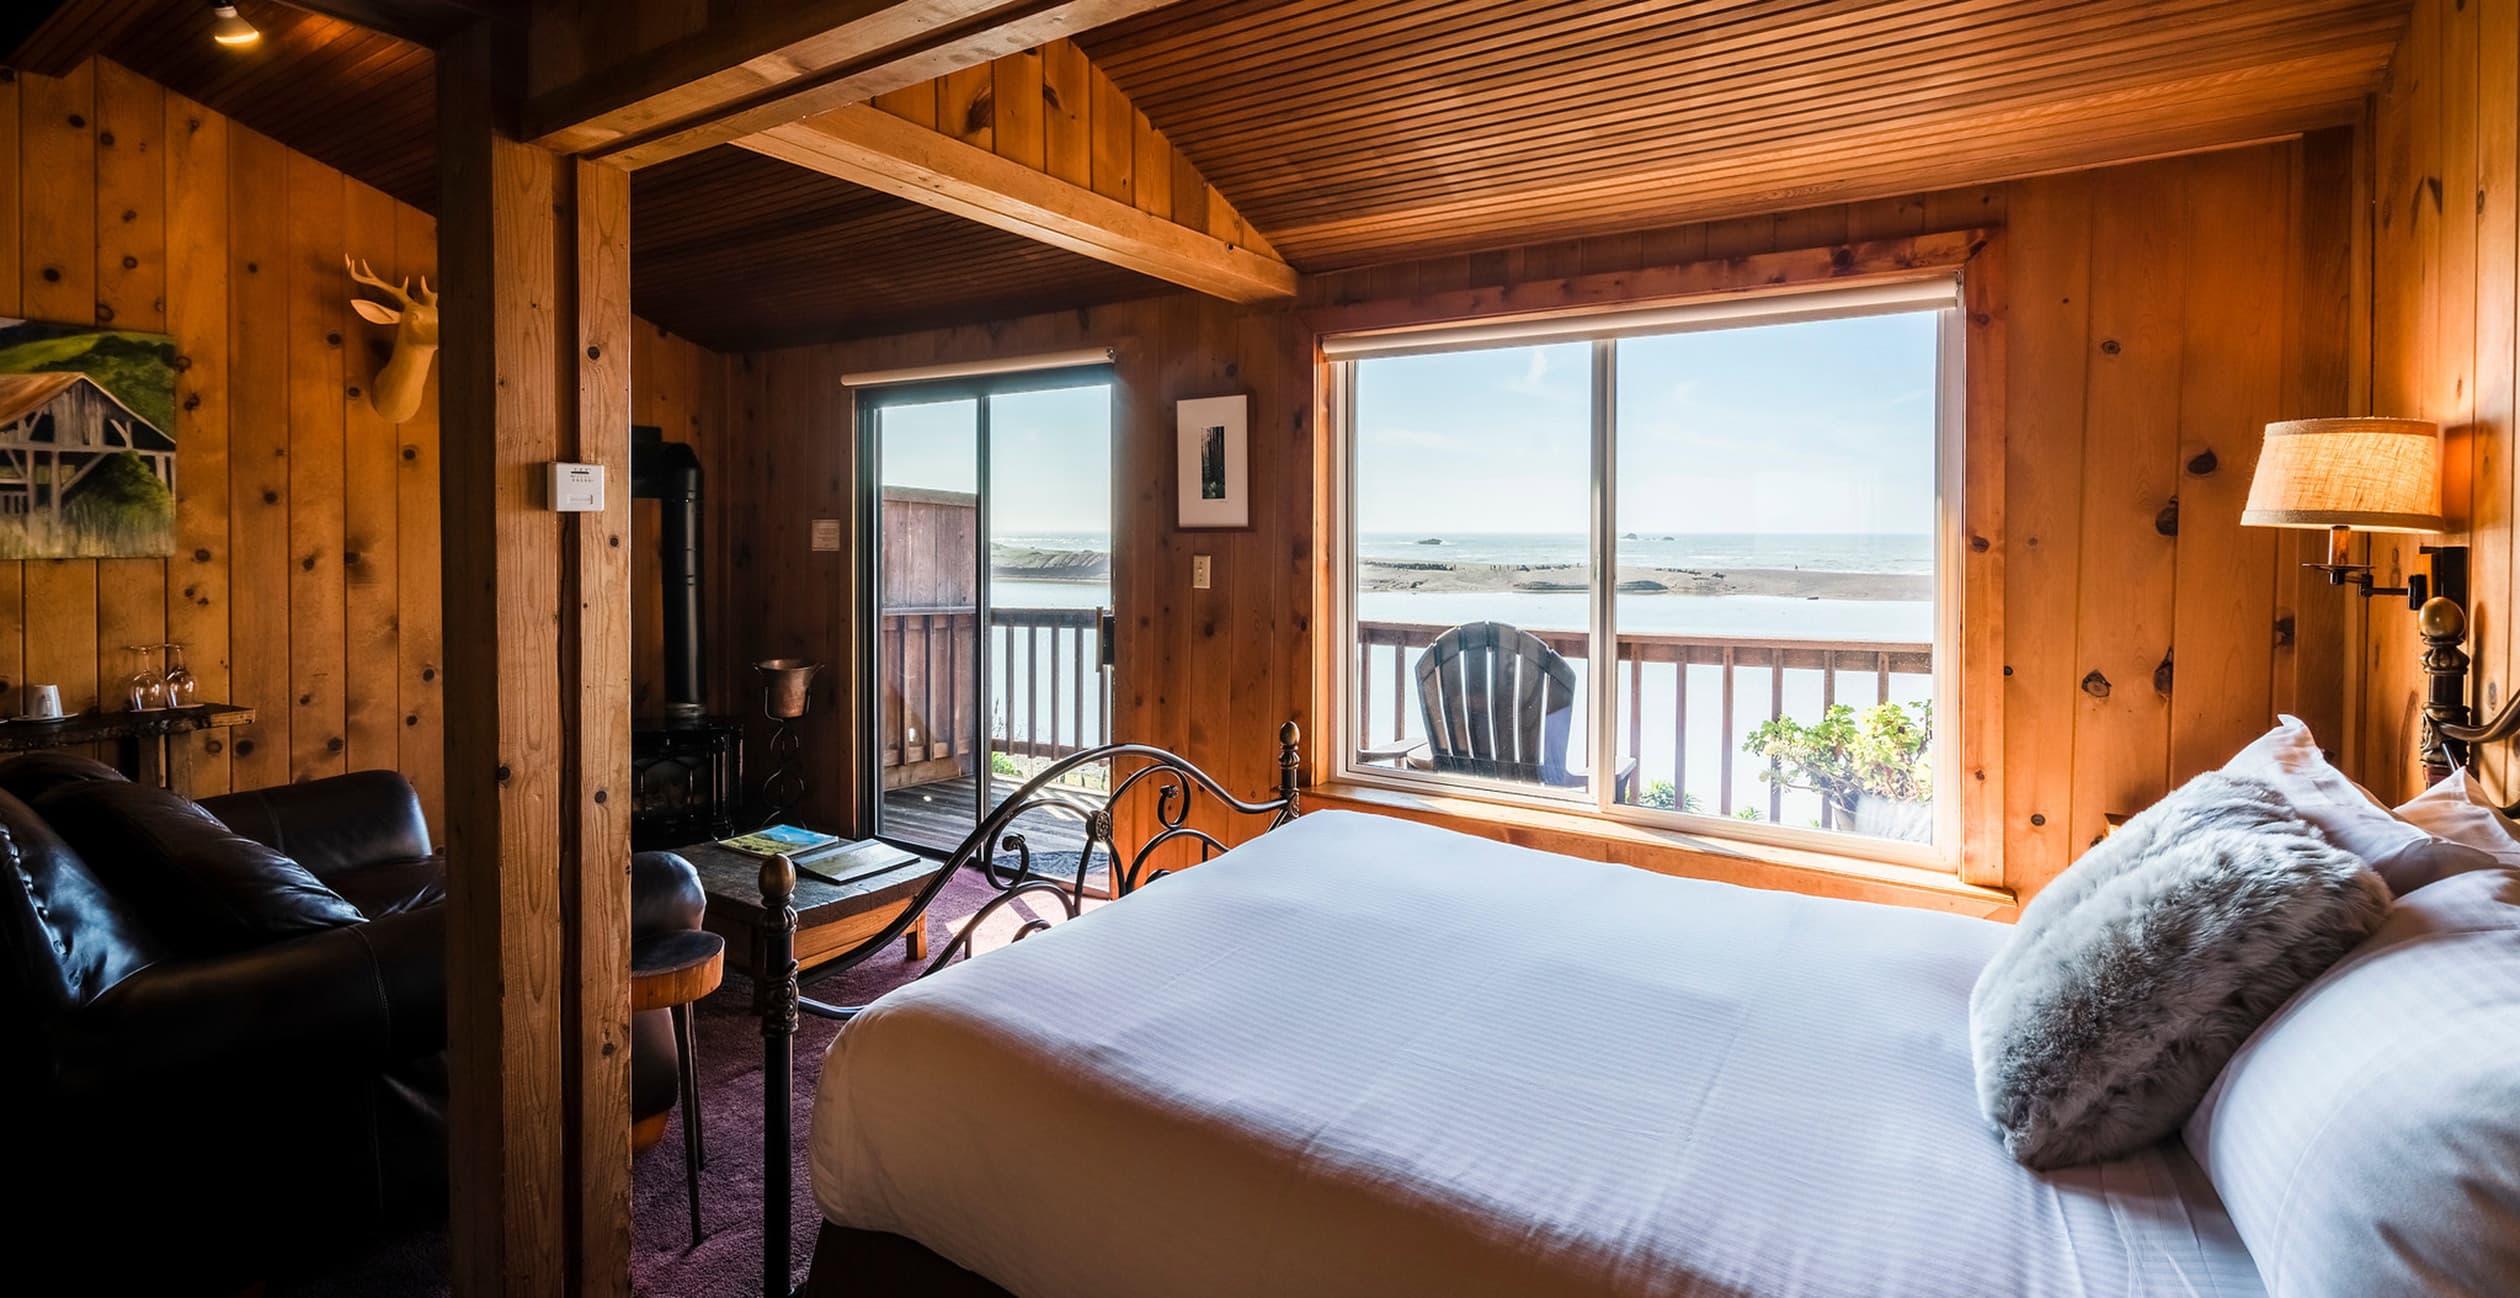 Cabin 4 bed with ocean view in the window